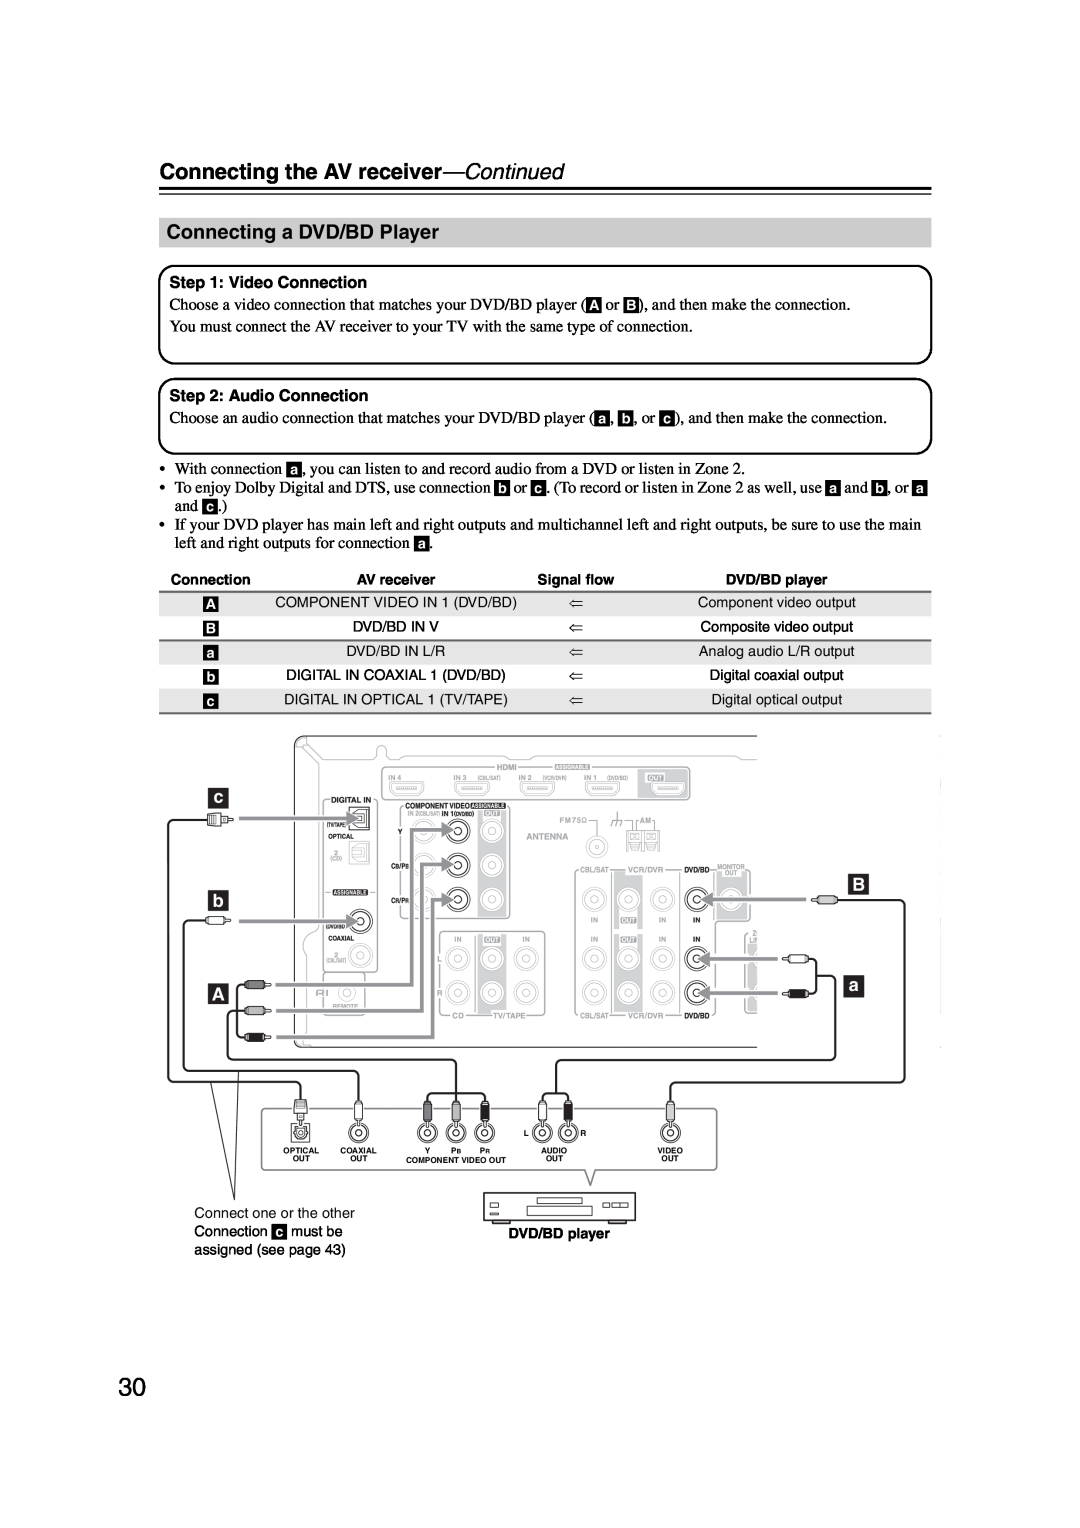 Onkyo 29344937, HT-S6200 instruction manual Connecting a DVD/BD Player, Connecting the AV receiver—Continued 